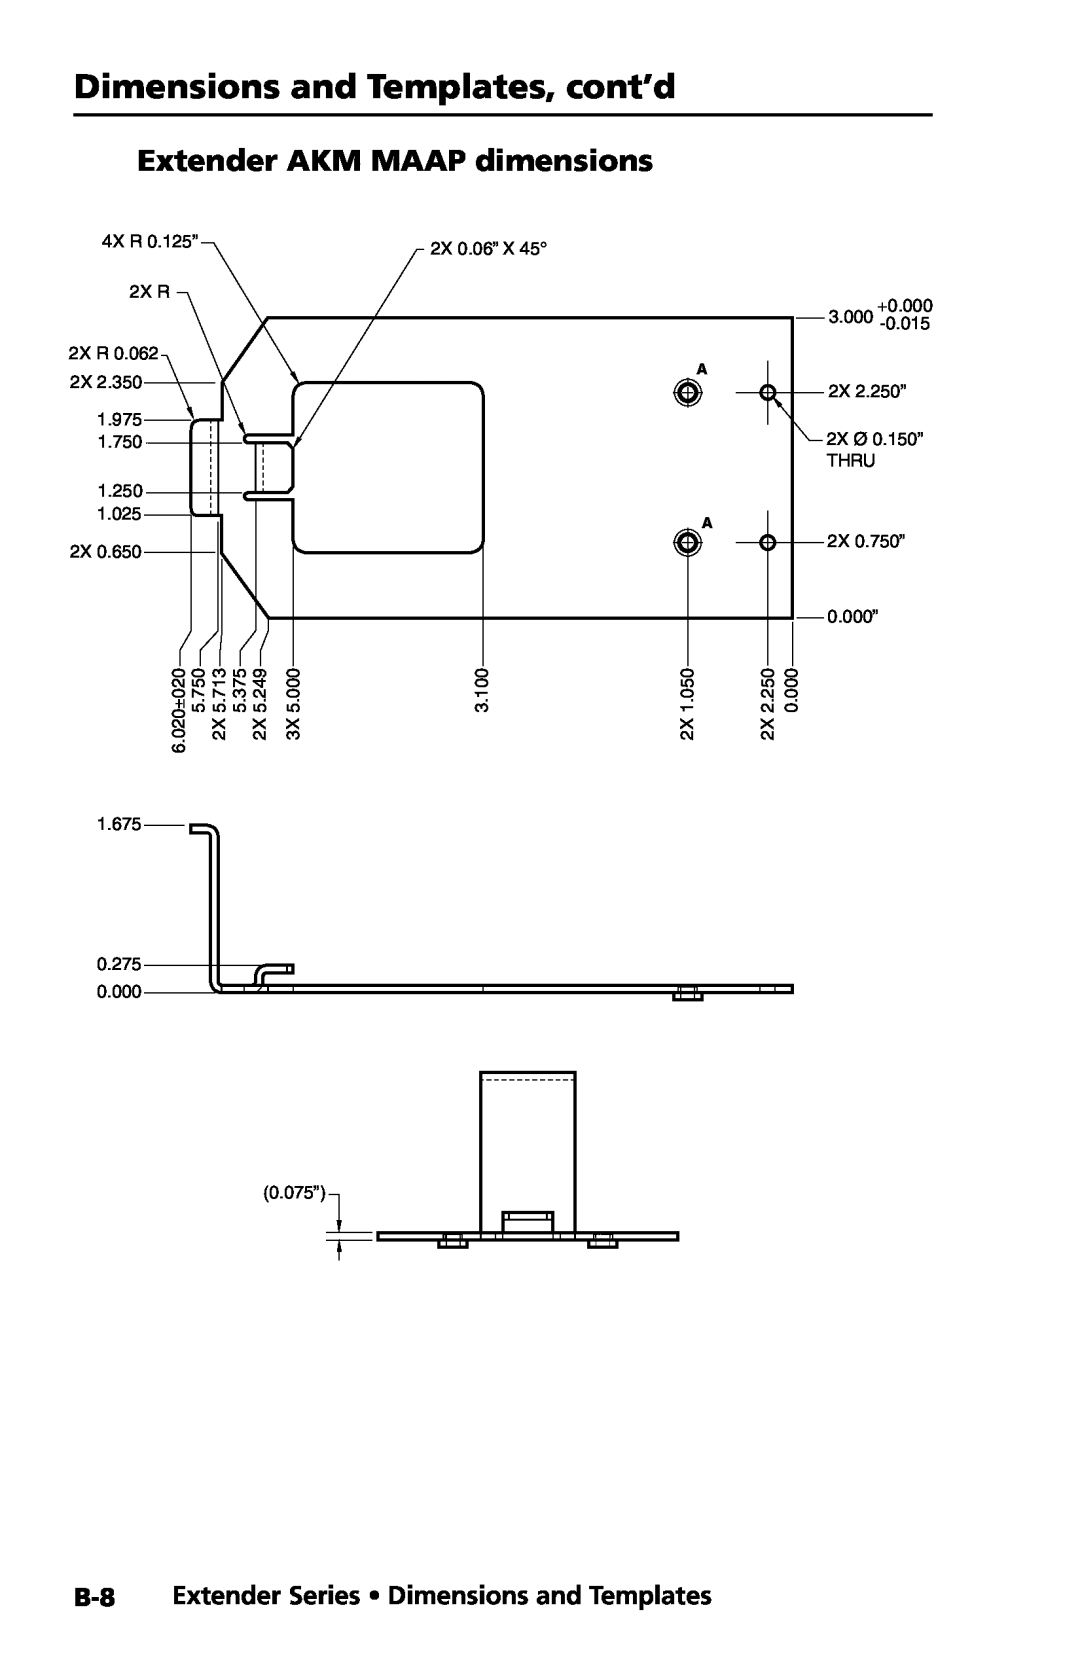 Extron electronic manual Extender AKM MAAP dimensions, B-8 Extender Series Dimensions and Templates, Preliminary 